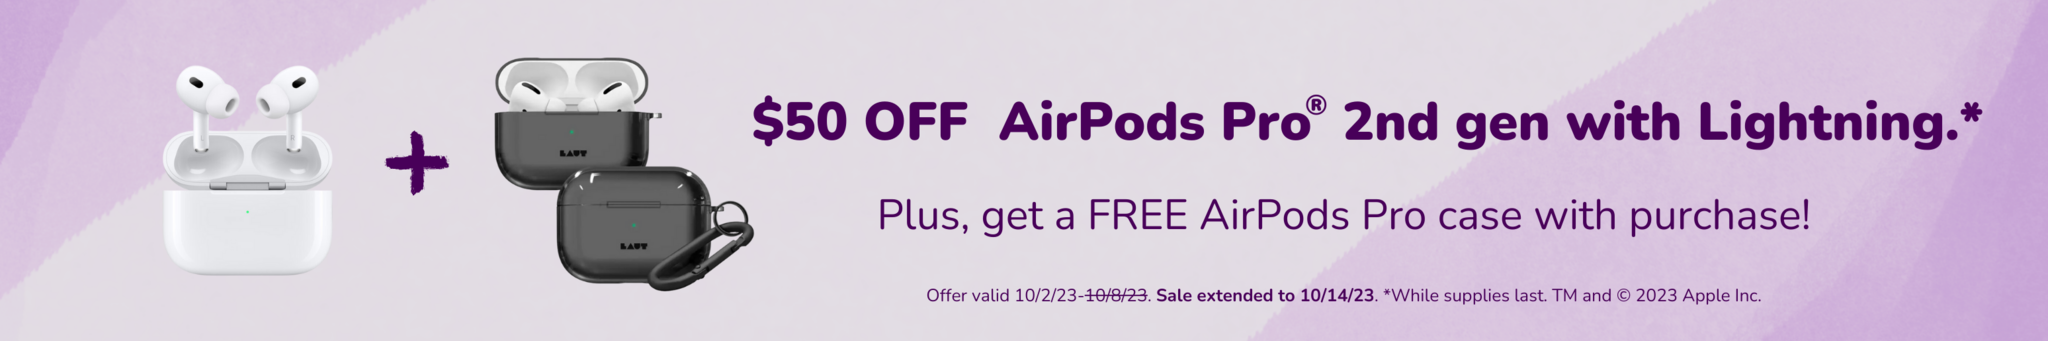 $50 off AirPods Pro 2nd gen with Lightning while supplies last. Plus, get a free AirPods Pro case with purchase! Valid 10/2/23-10/8/23